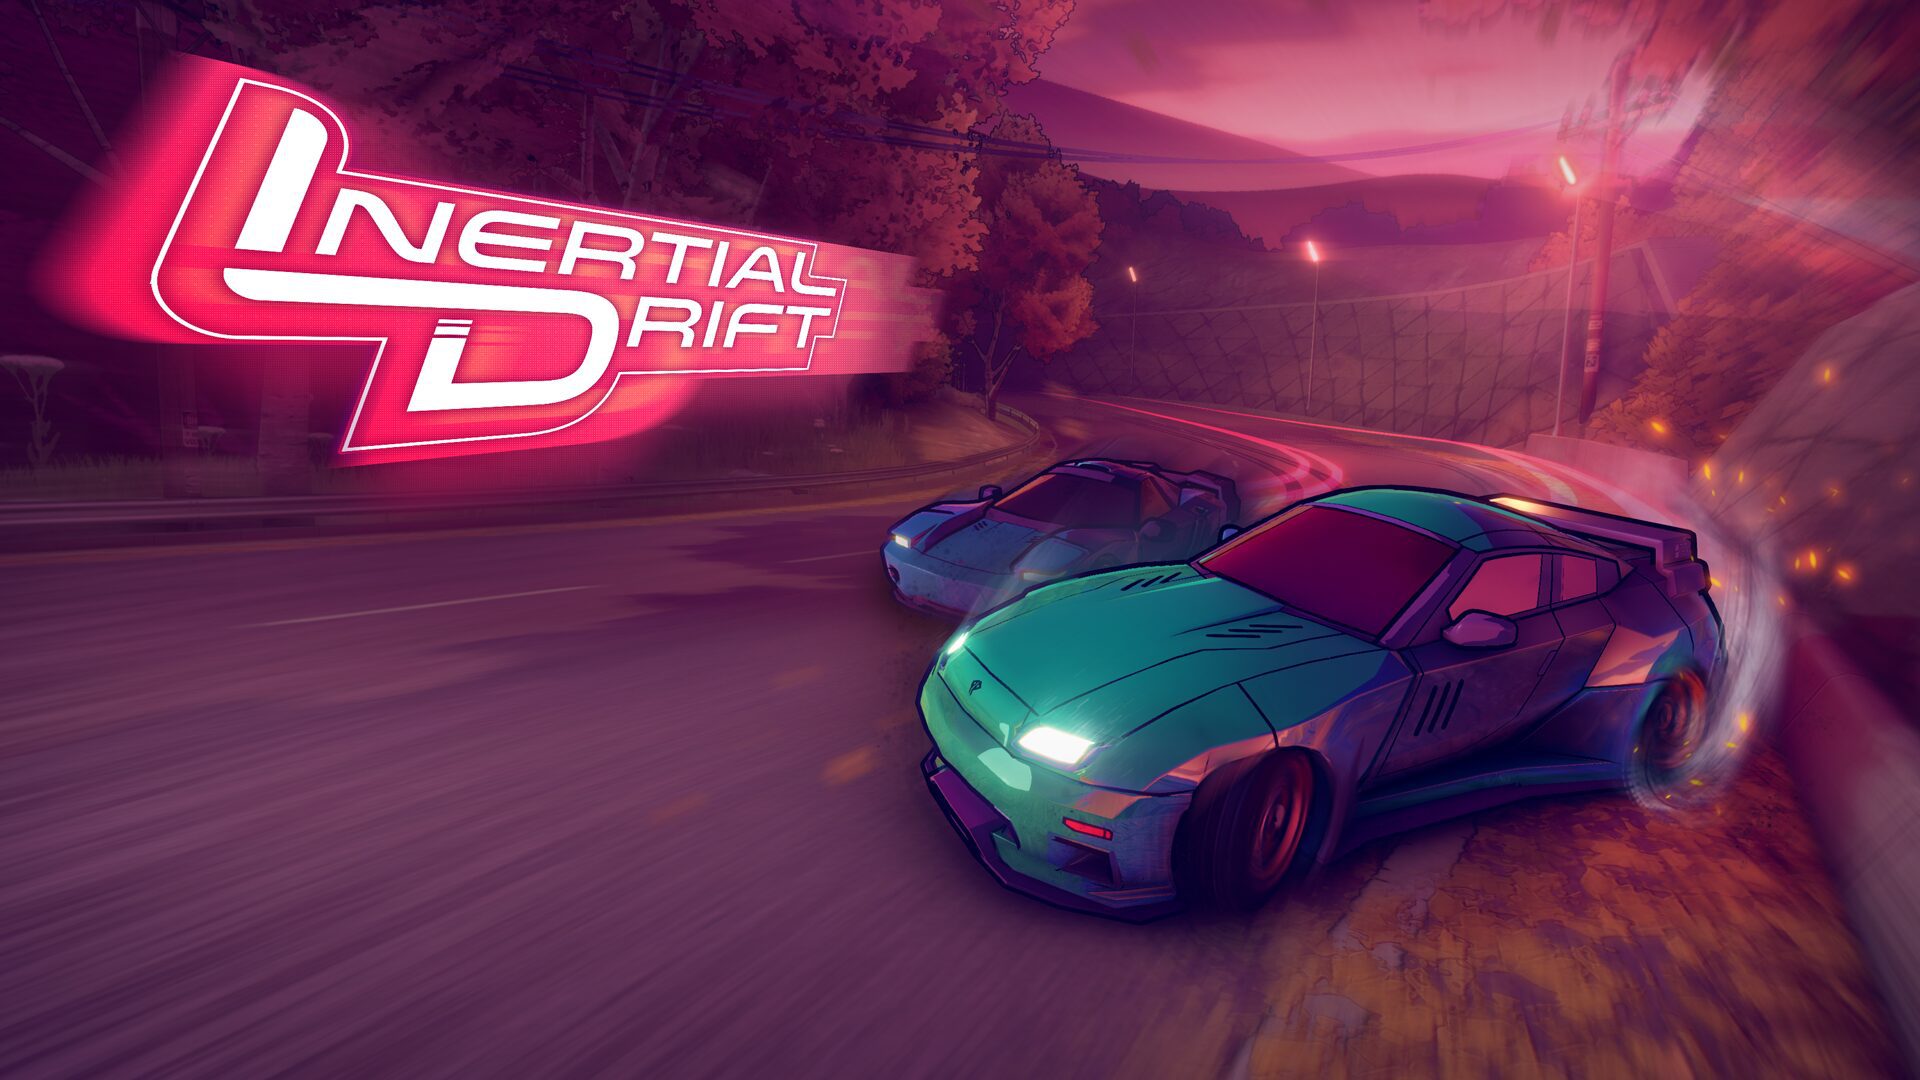 Vroom! Vroom! ‘Inertial Drift’ out now for Xbox One